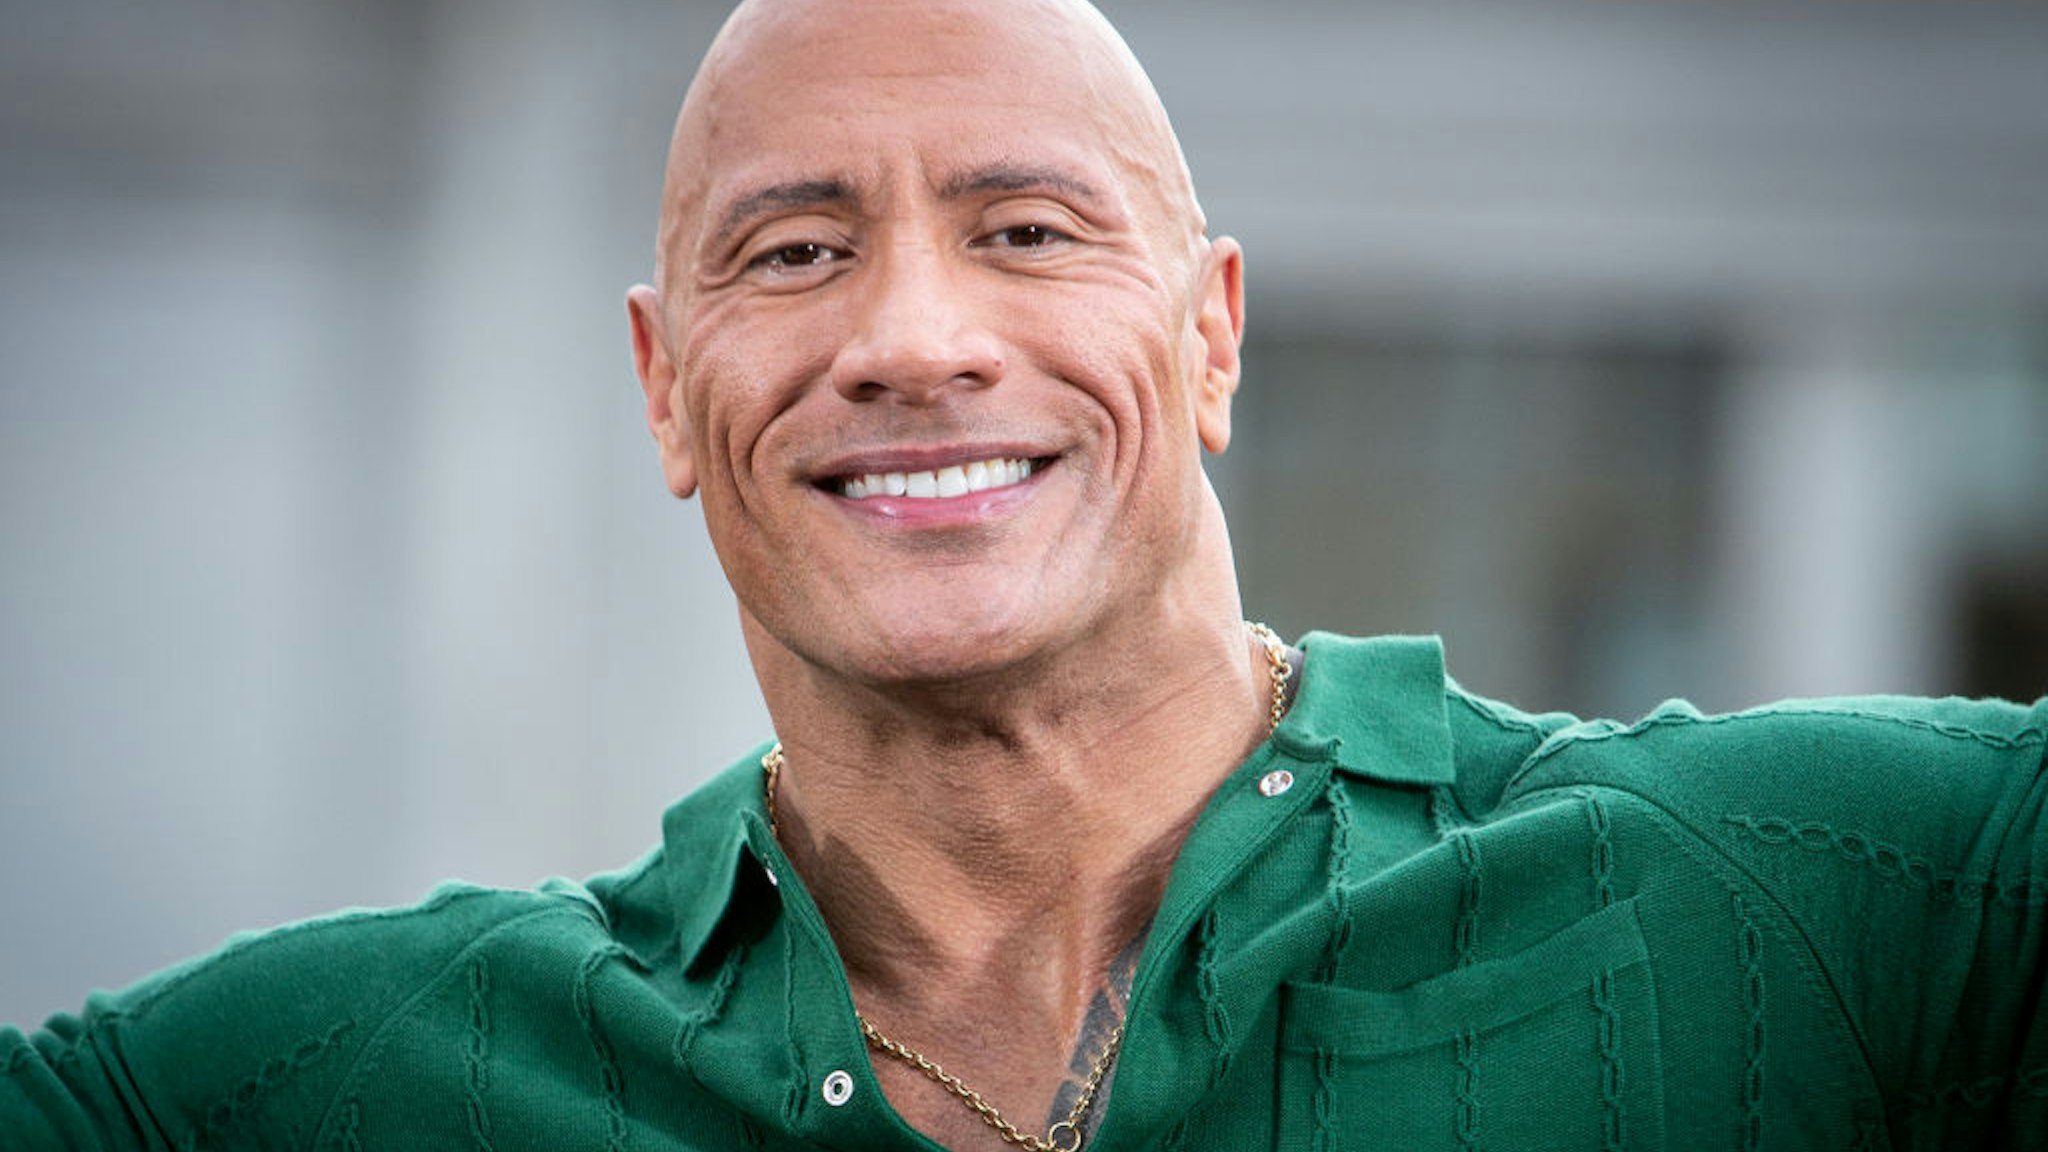 MADRID, SPAIN - OCTOBER 19: US actor Dwayne Johnson attends the "Black Adam" photocall at NH Collection Madrid Eurobuilding hotel on October 19, 2022 in Madrid, Spain. (Photo by Pablo Cuadra/WireImage)